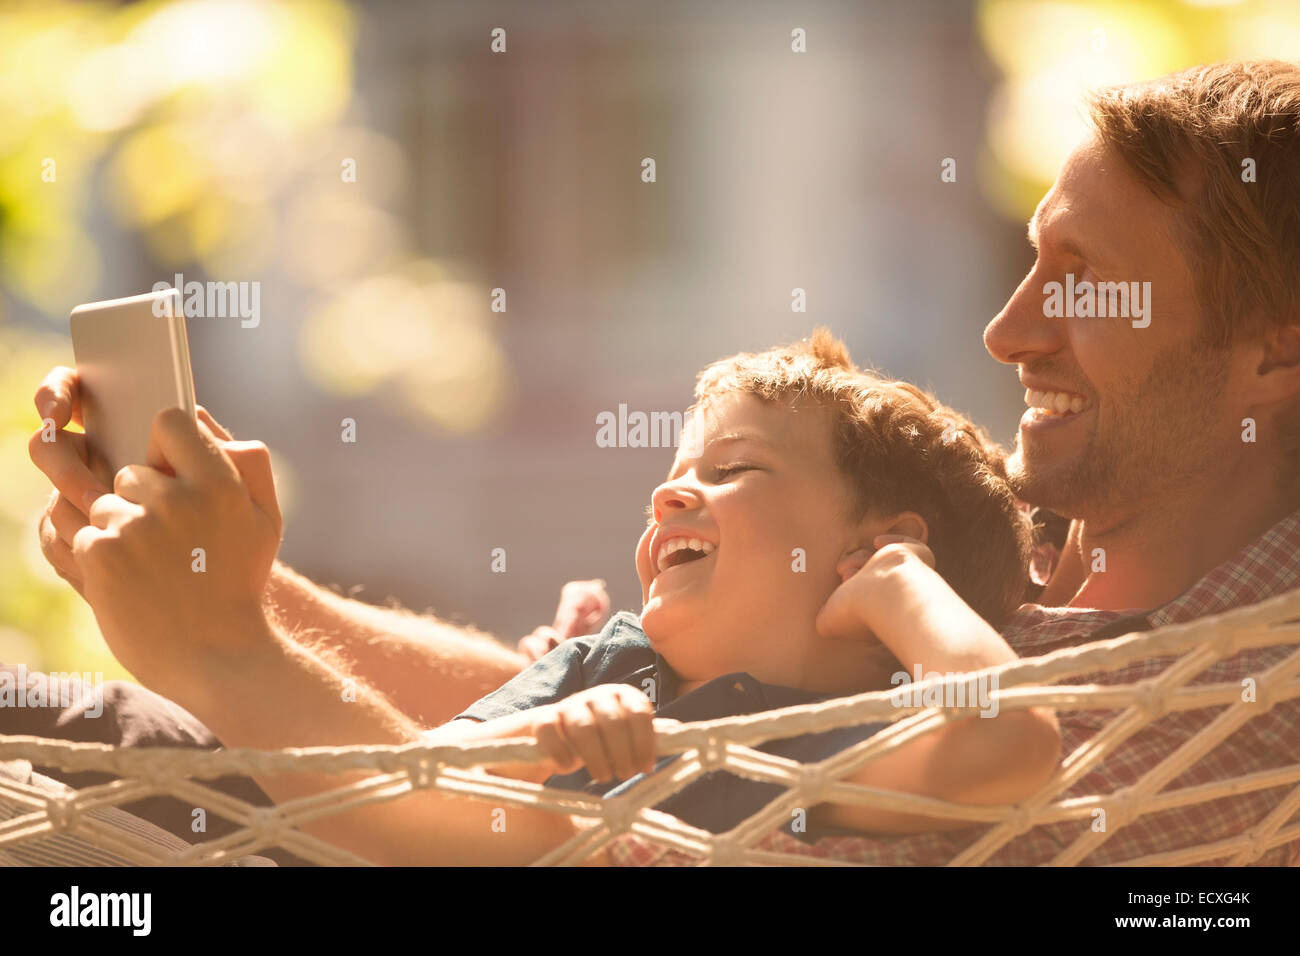 Father and son using digital tablet in hammock Stock Photo